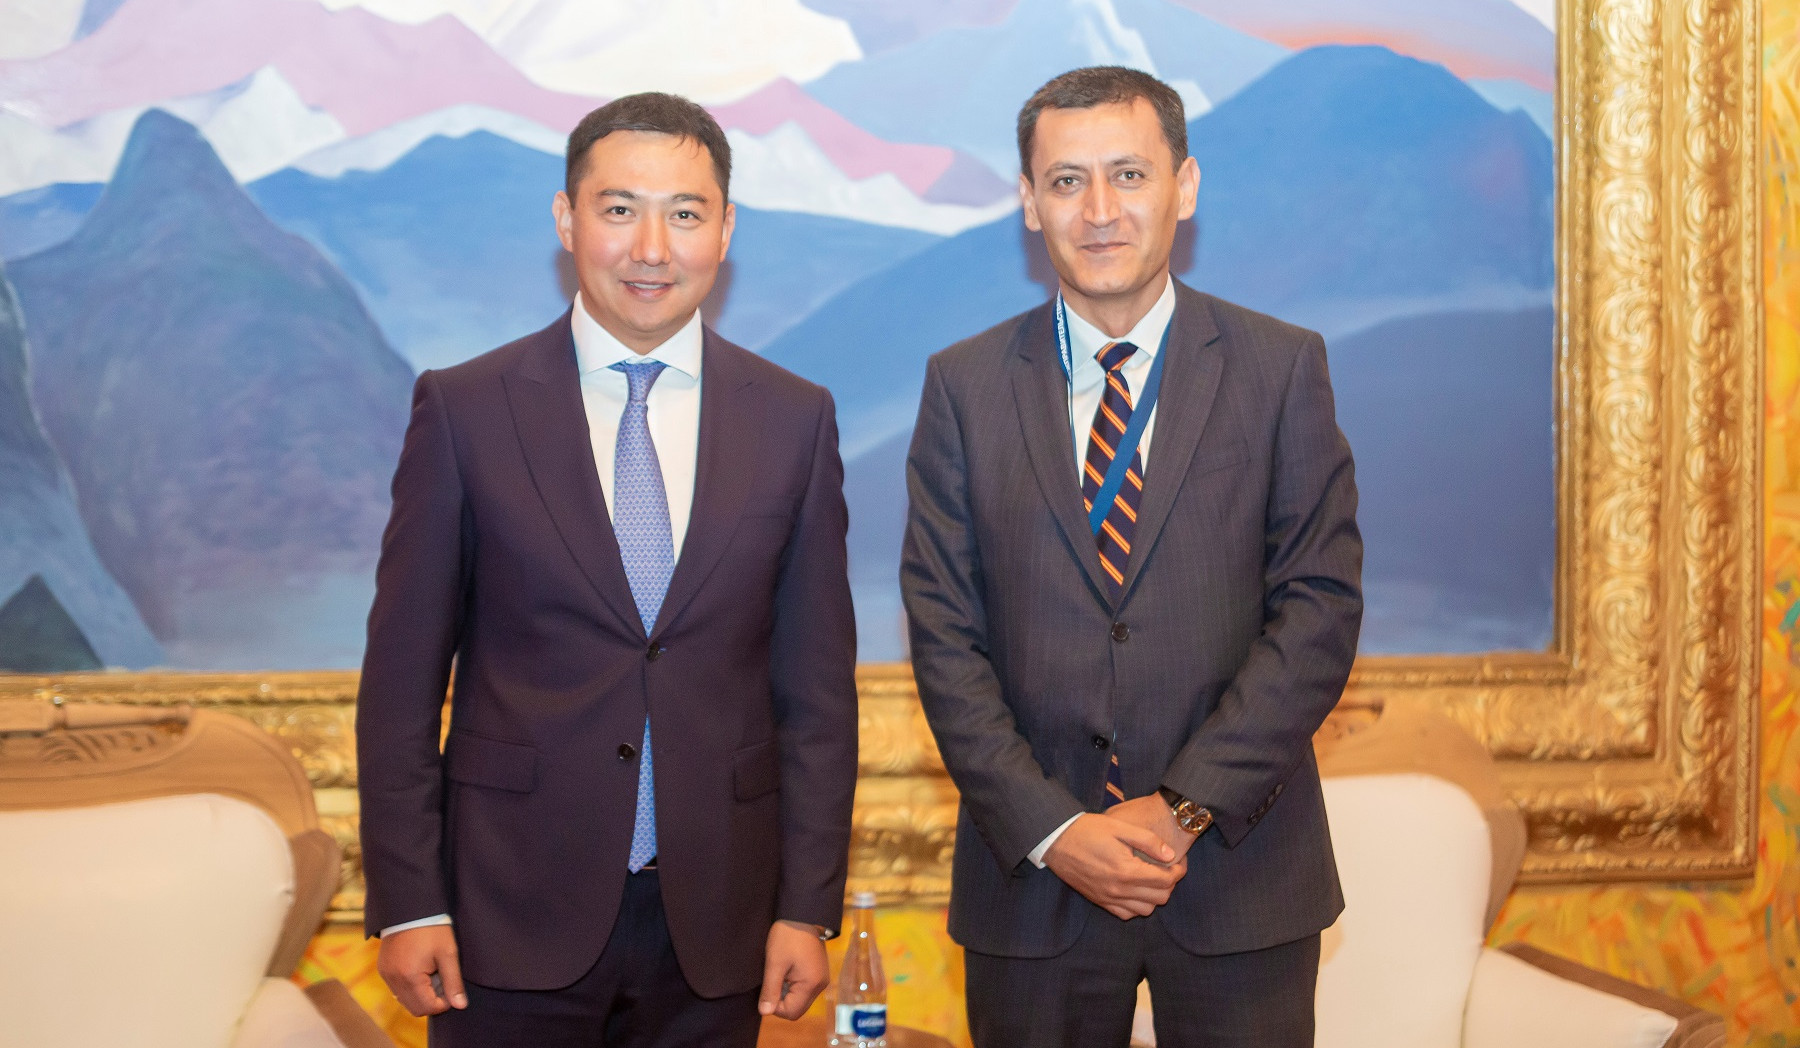 It is necessary to cooperate, and for this, all possible resources should be used: Armenian Deputy Minister of Education, Science, Culture and Sports to Kyrgyz Minister